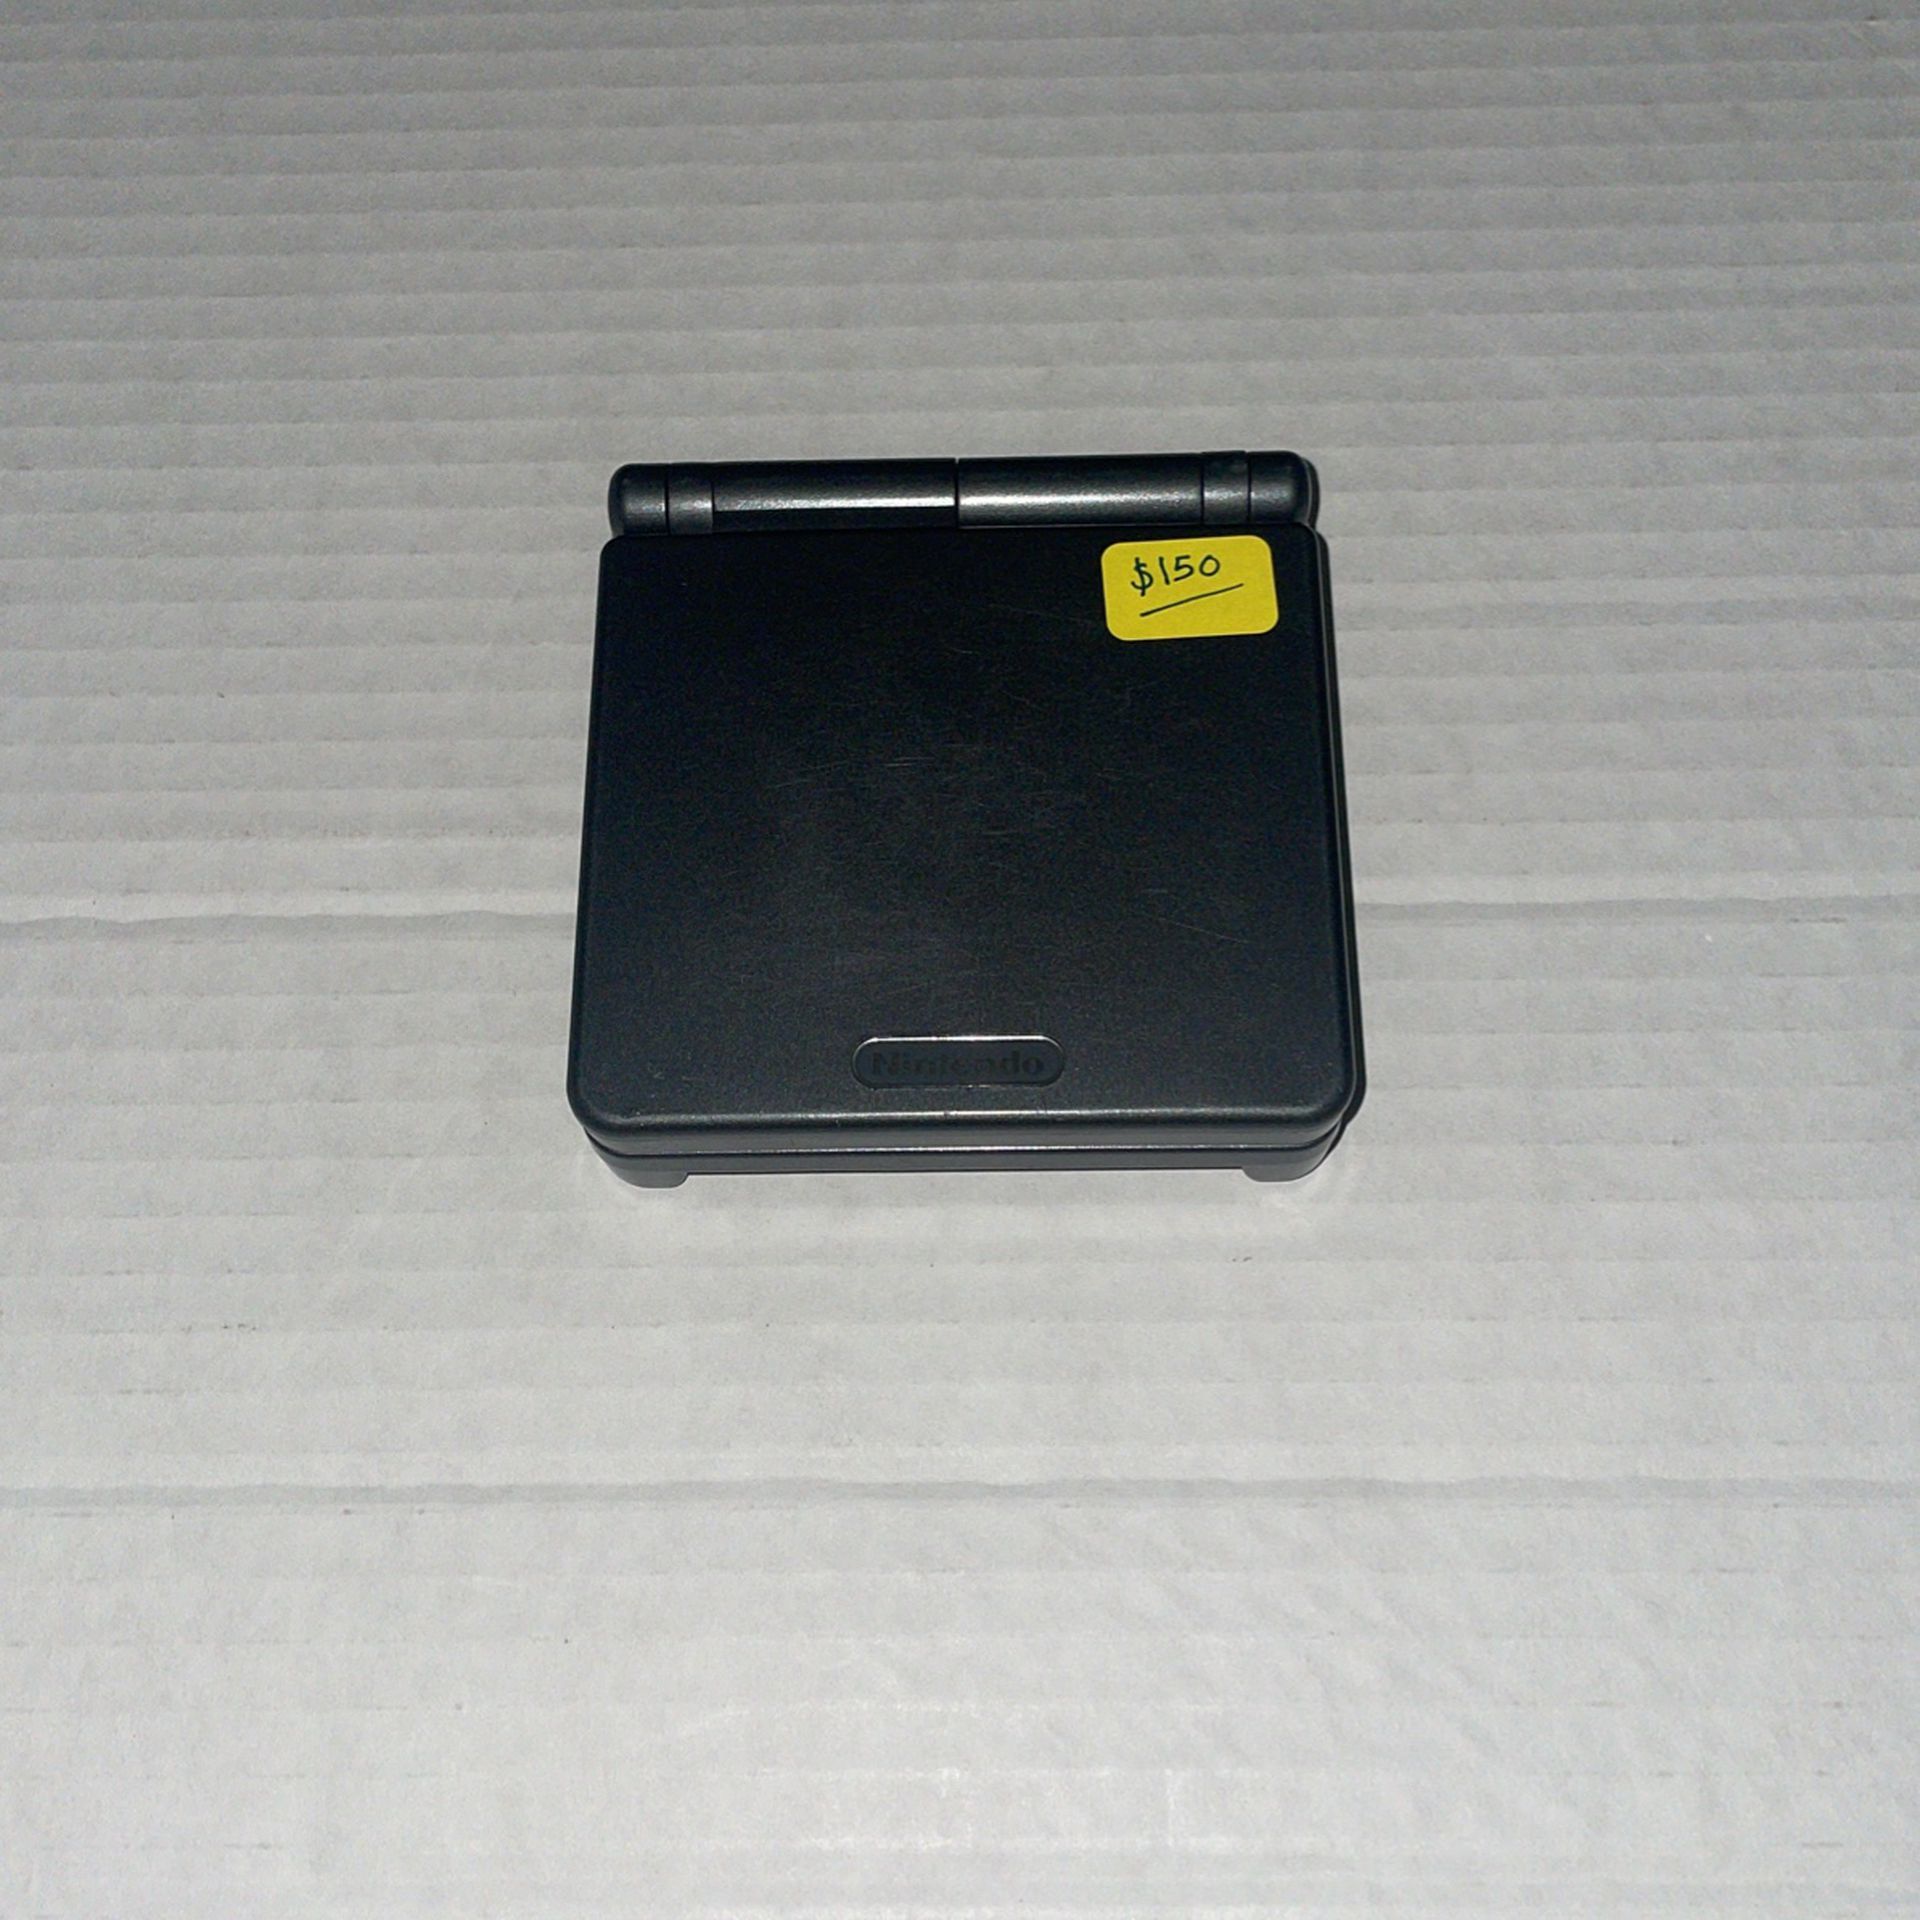 Gameboy Advance SP Model AGS-101